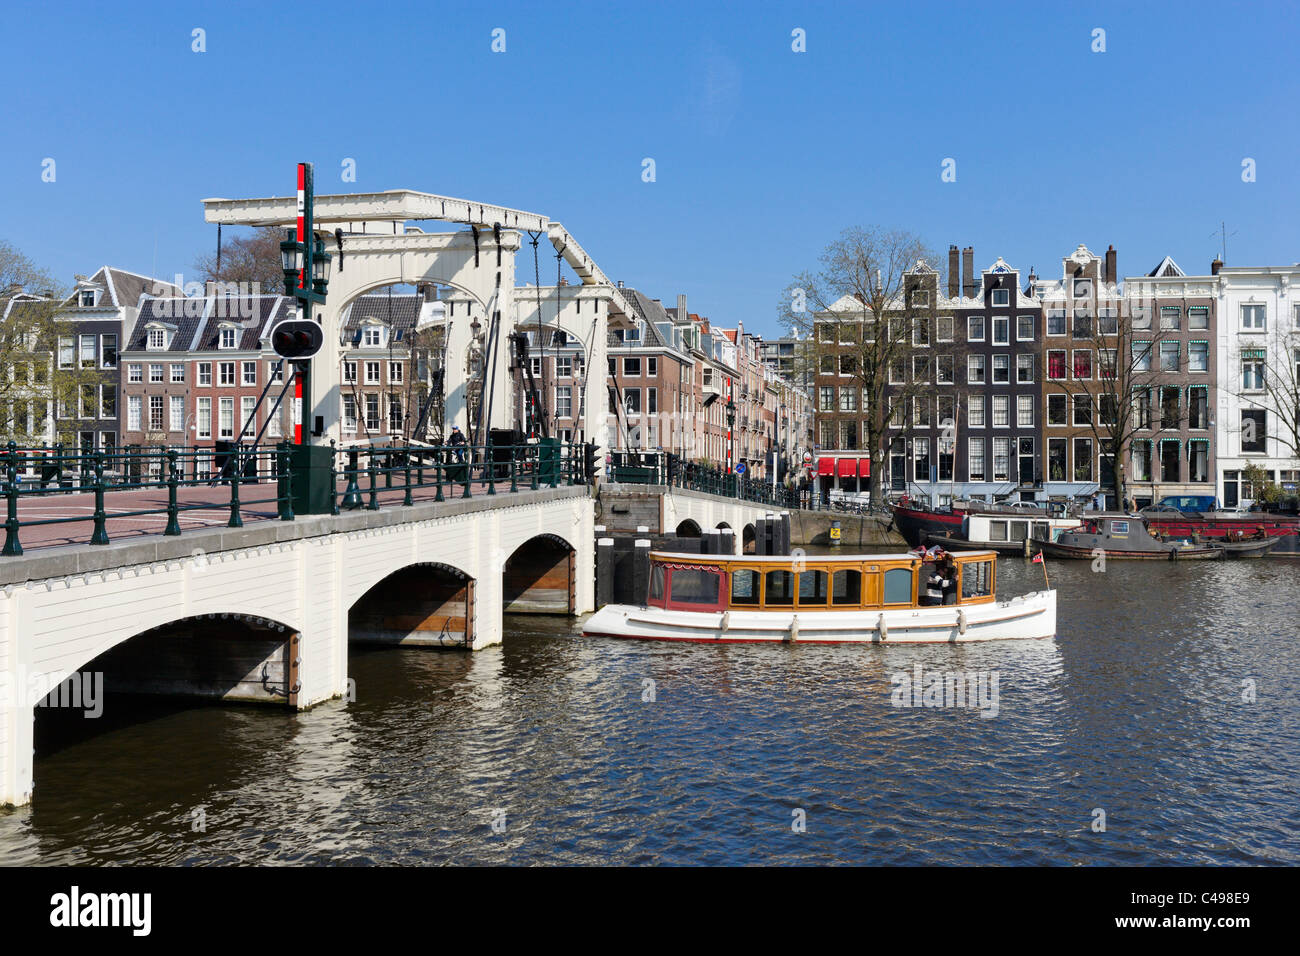 The Magere Brug, River Amstel, Amsterdam, Netherlands Stock Photo